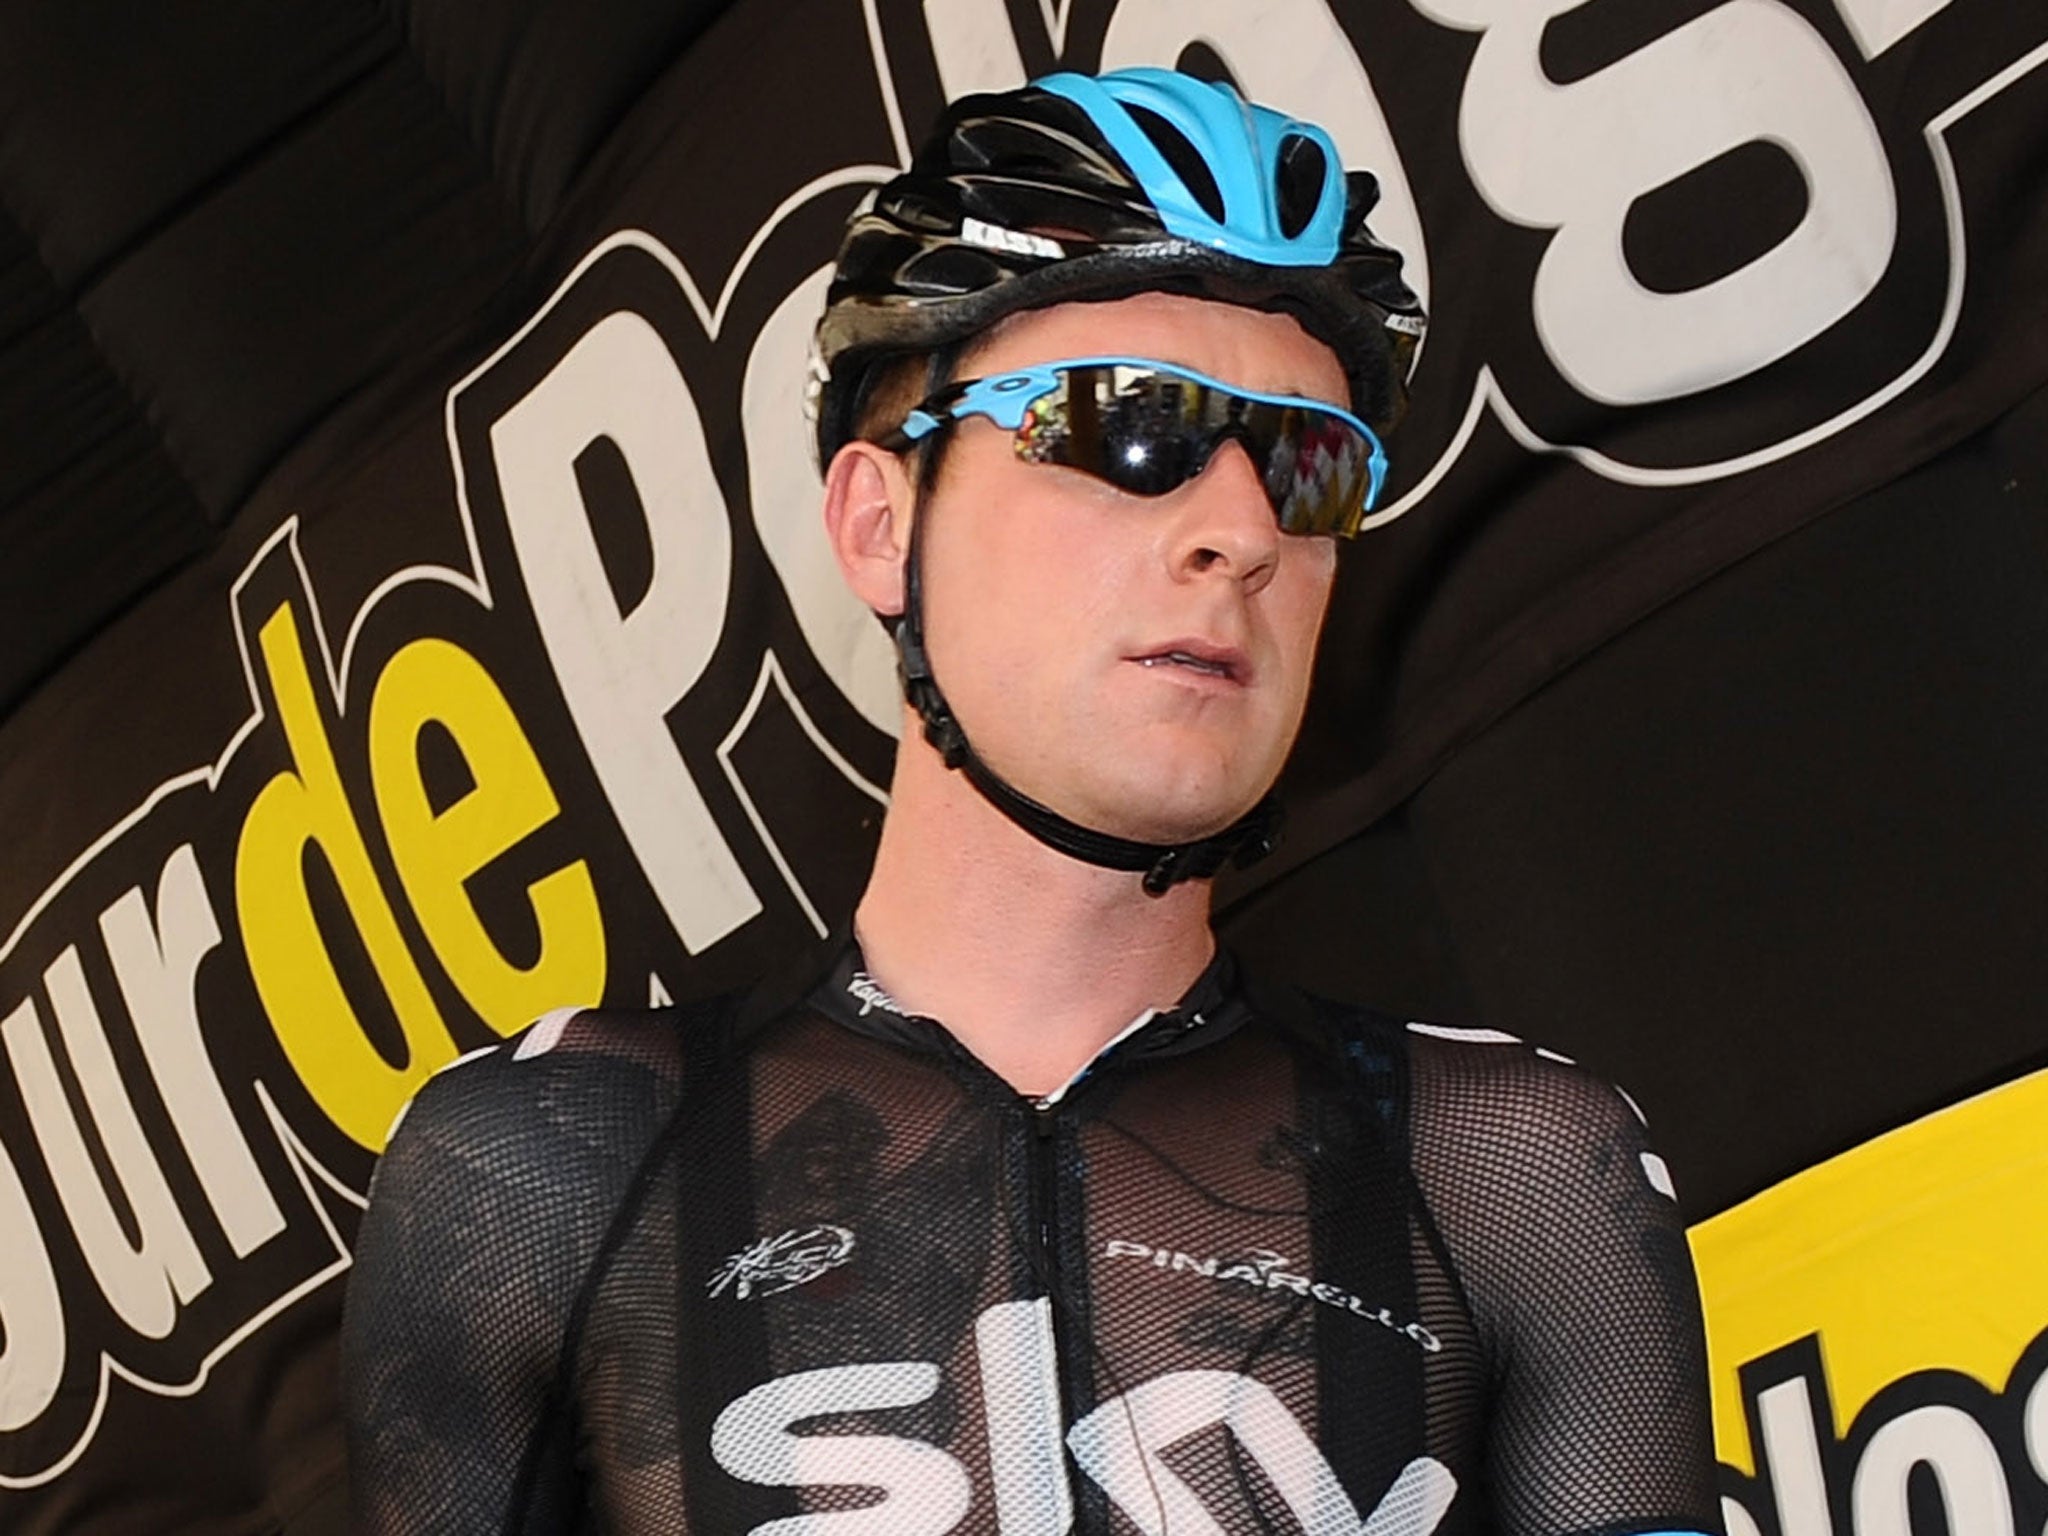 Bradley Wiggins is on the Tour of Poland as part of his rehabilitation